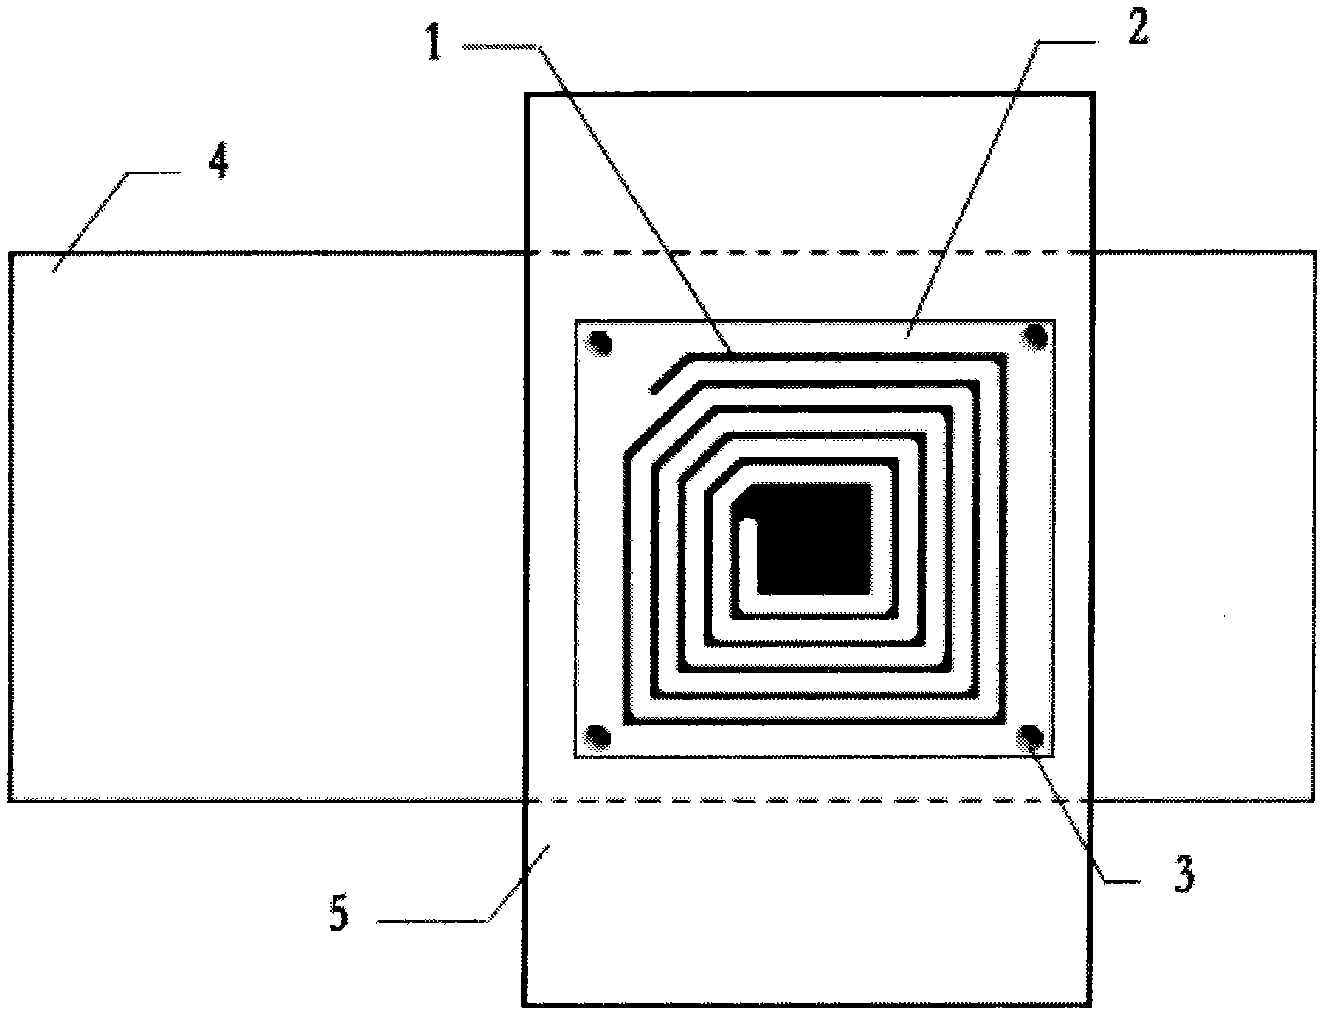 Method for preparing primary circuit by jet-printing metal conductive printing ink by virtue of laser or microwave processing